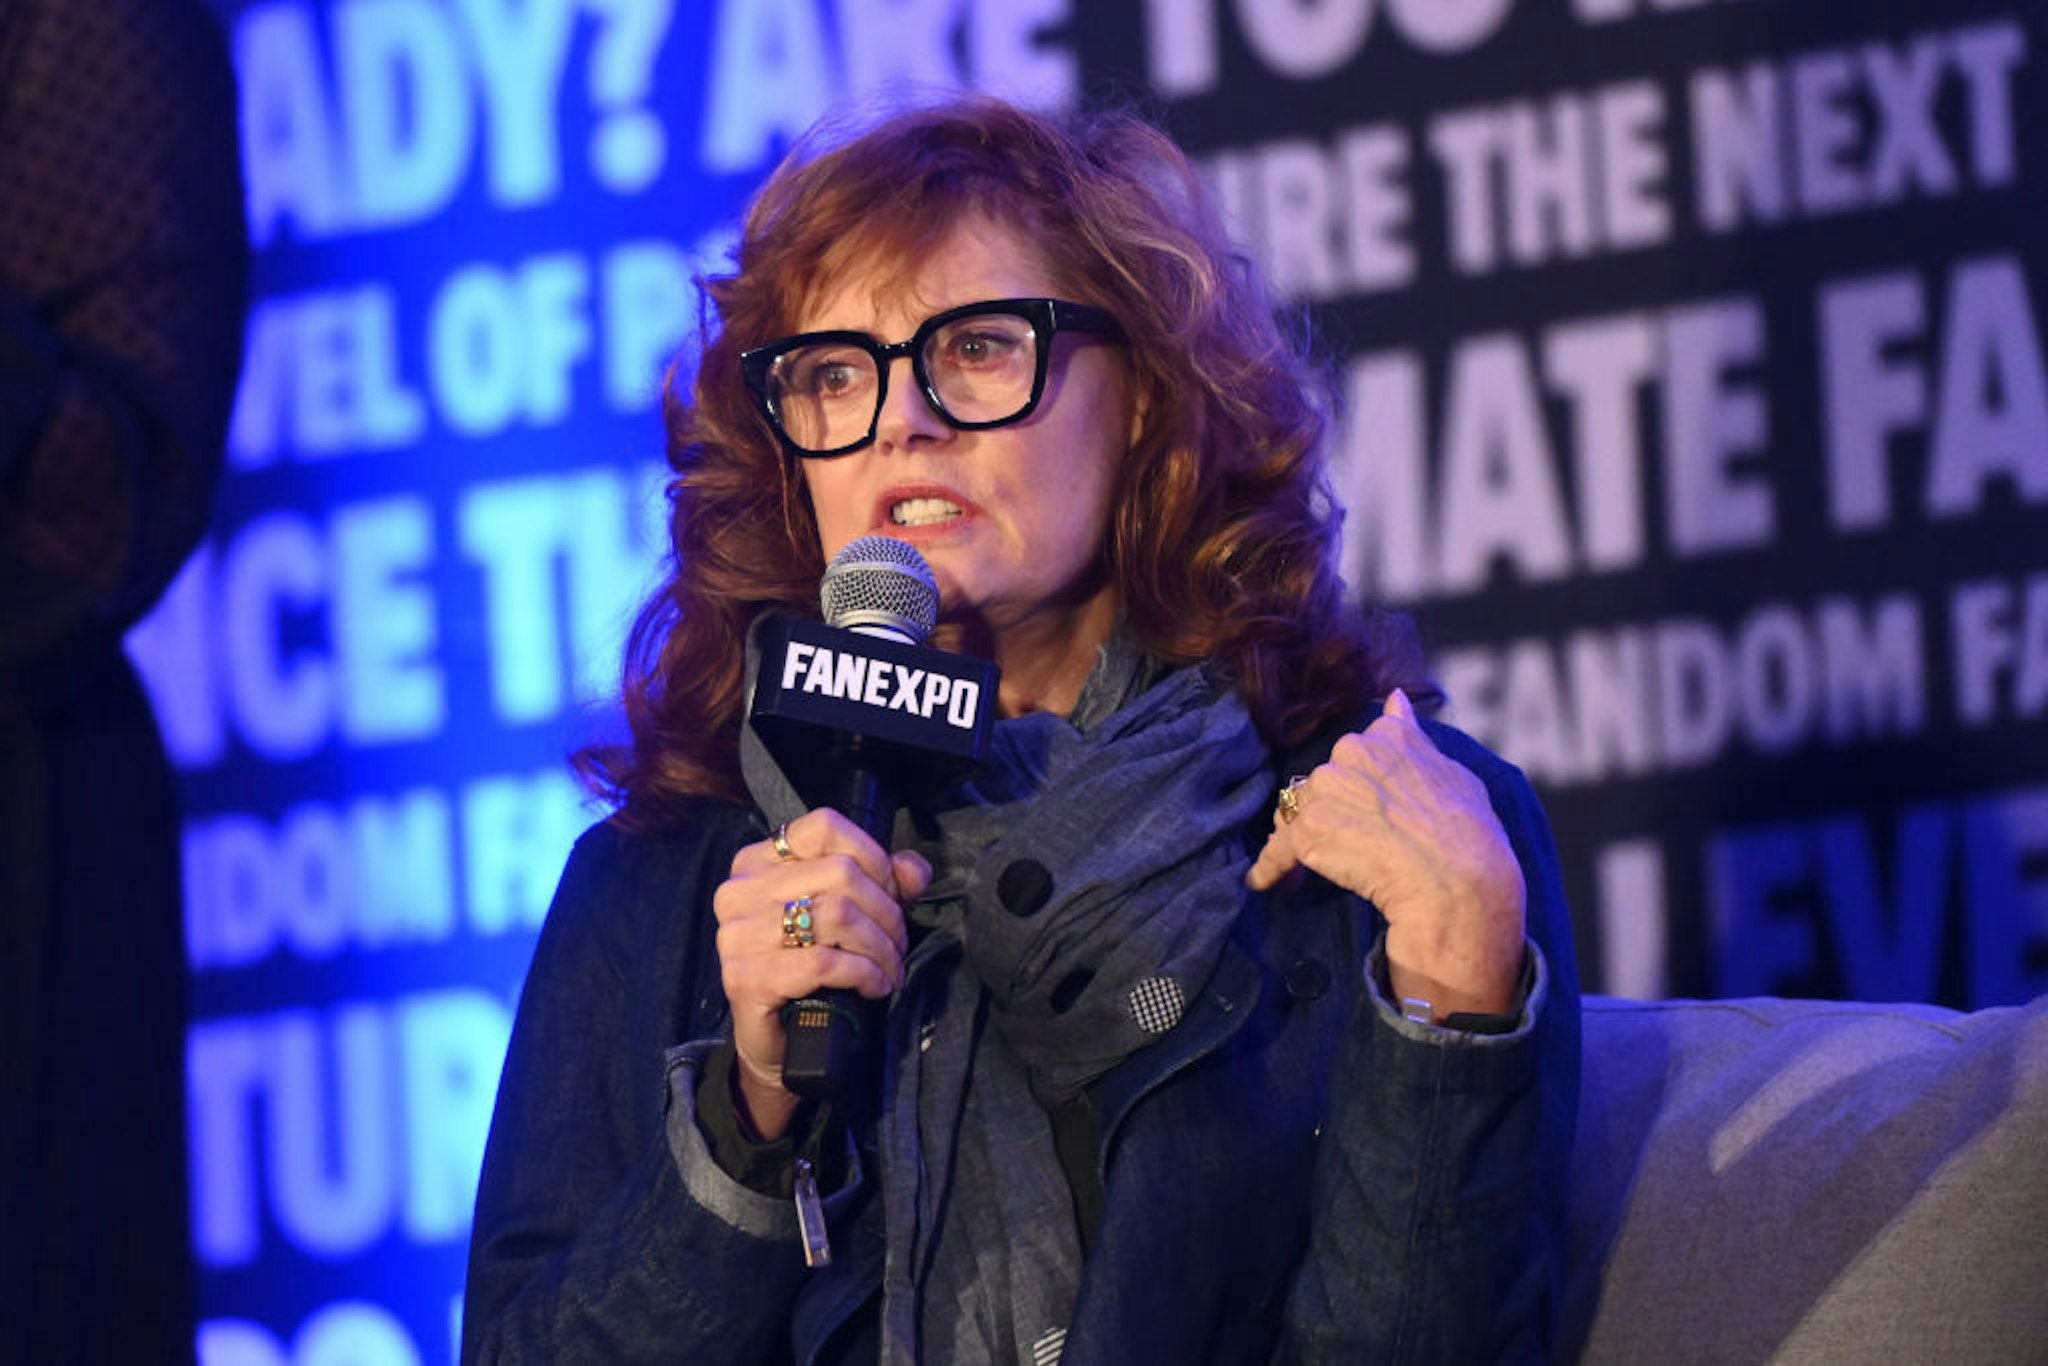 ROSEMONT, ILLINOIS - AUGUST 13: Susan Sarandon speaks on stage during FAN EXPO Chicago at Donald E. Stephens Convention Center on August 13, 2023 in Rosemont, Illinois. (Photo by Daniel Boczarski/Getty Images)